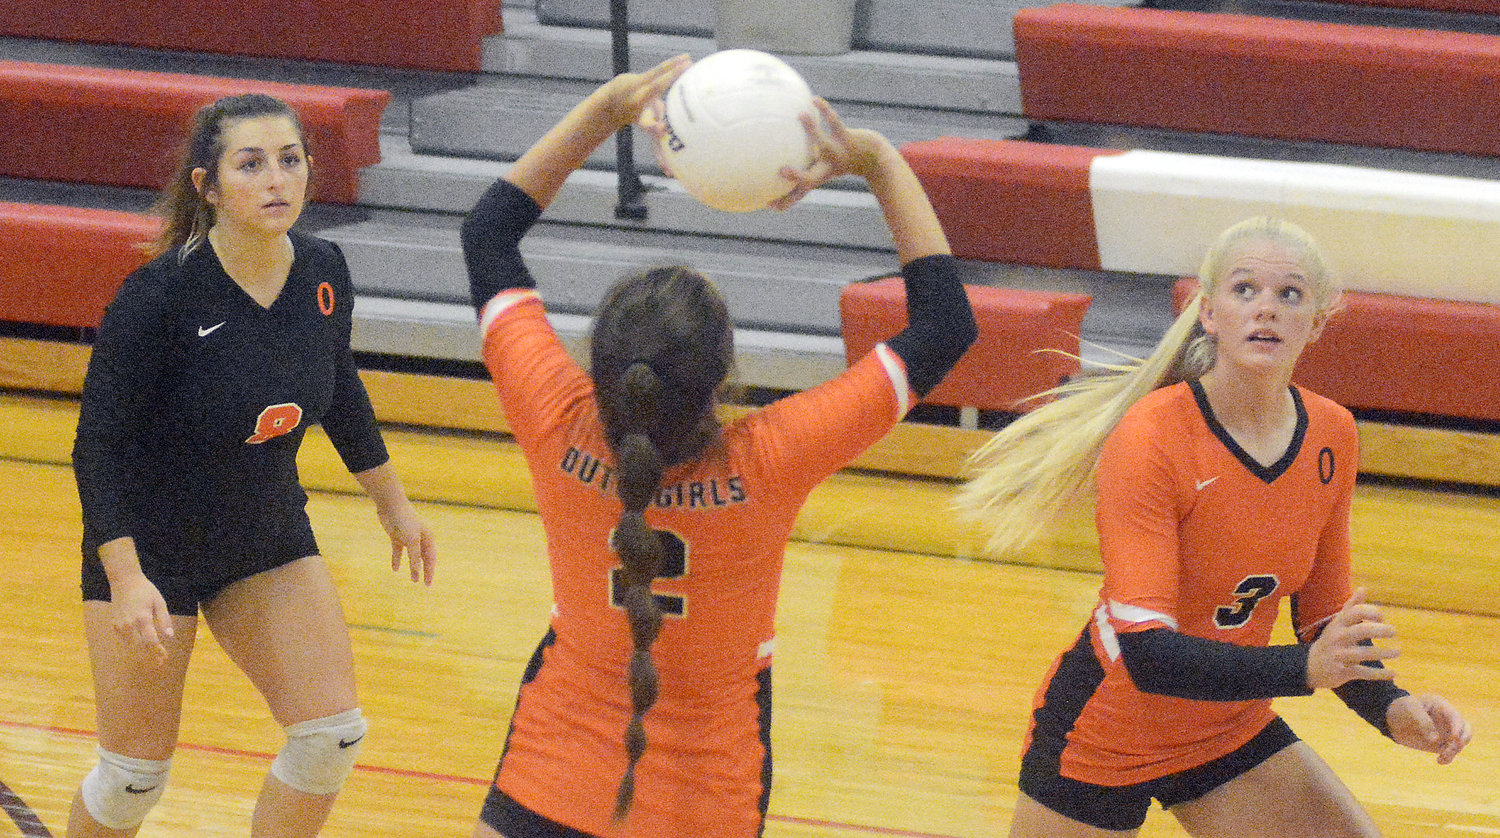 Kylie Kitchen (above, center) sets the ball while Olivia Vandegriffe (above, far left) and Josie Gerlemann (above, far right) watch the ball to see where it is set during Owensville’s three-set victory last Tuesday night in Belle.